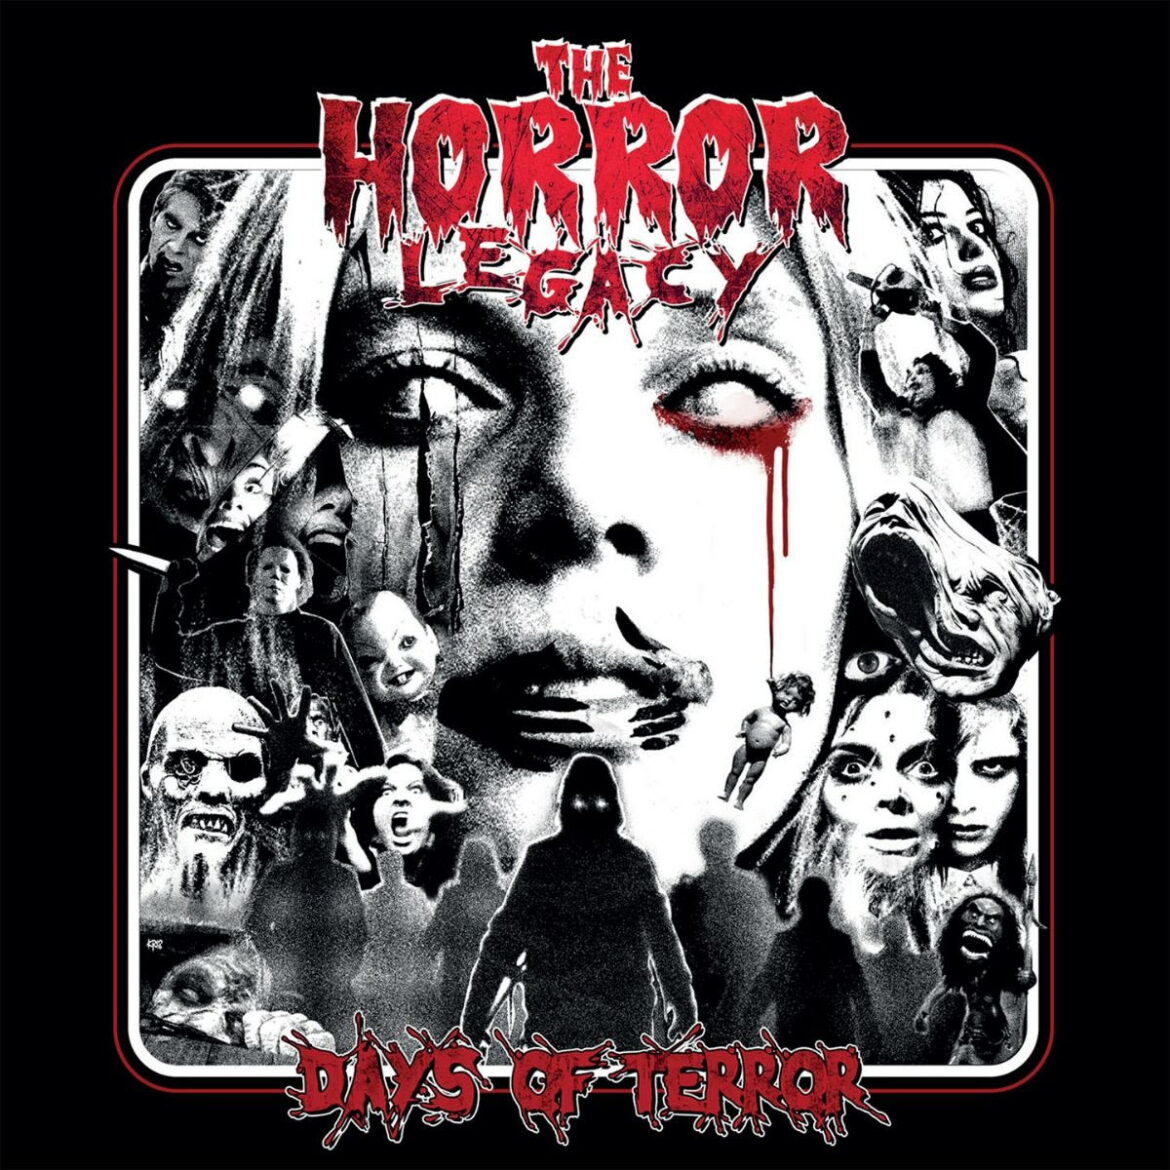 THE HORROR LEGACY – Debut New Single